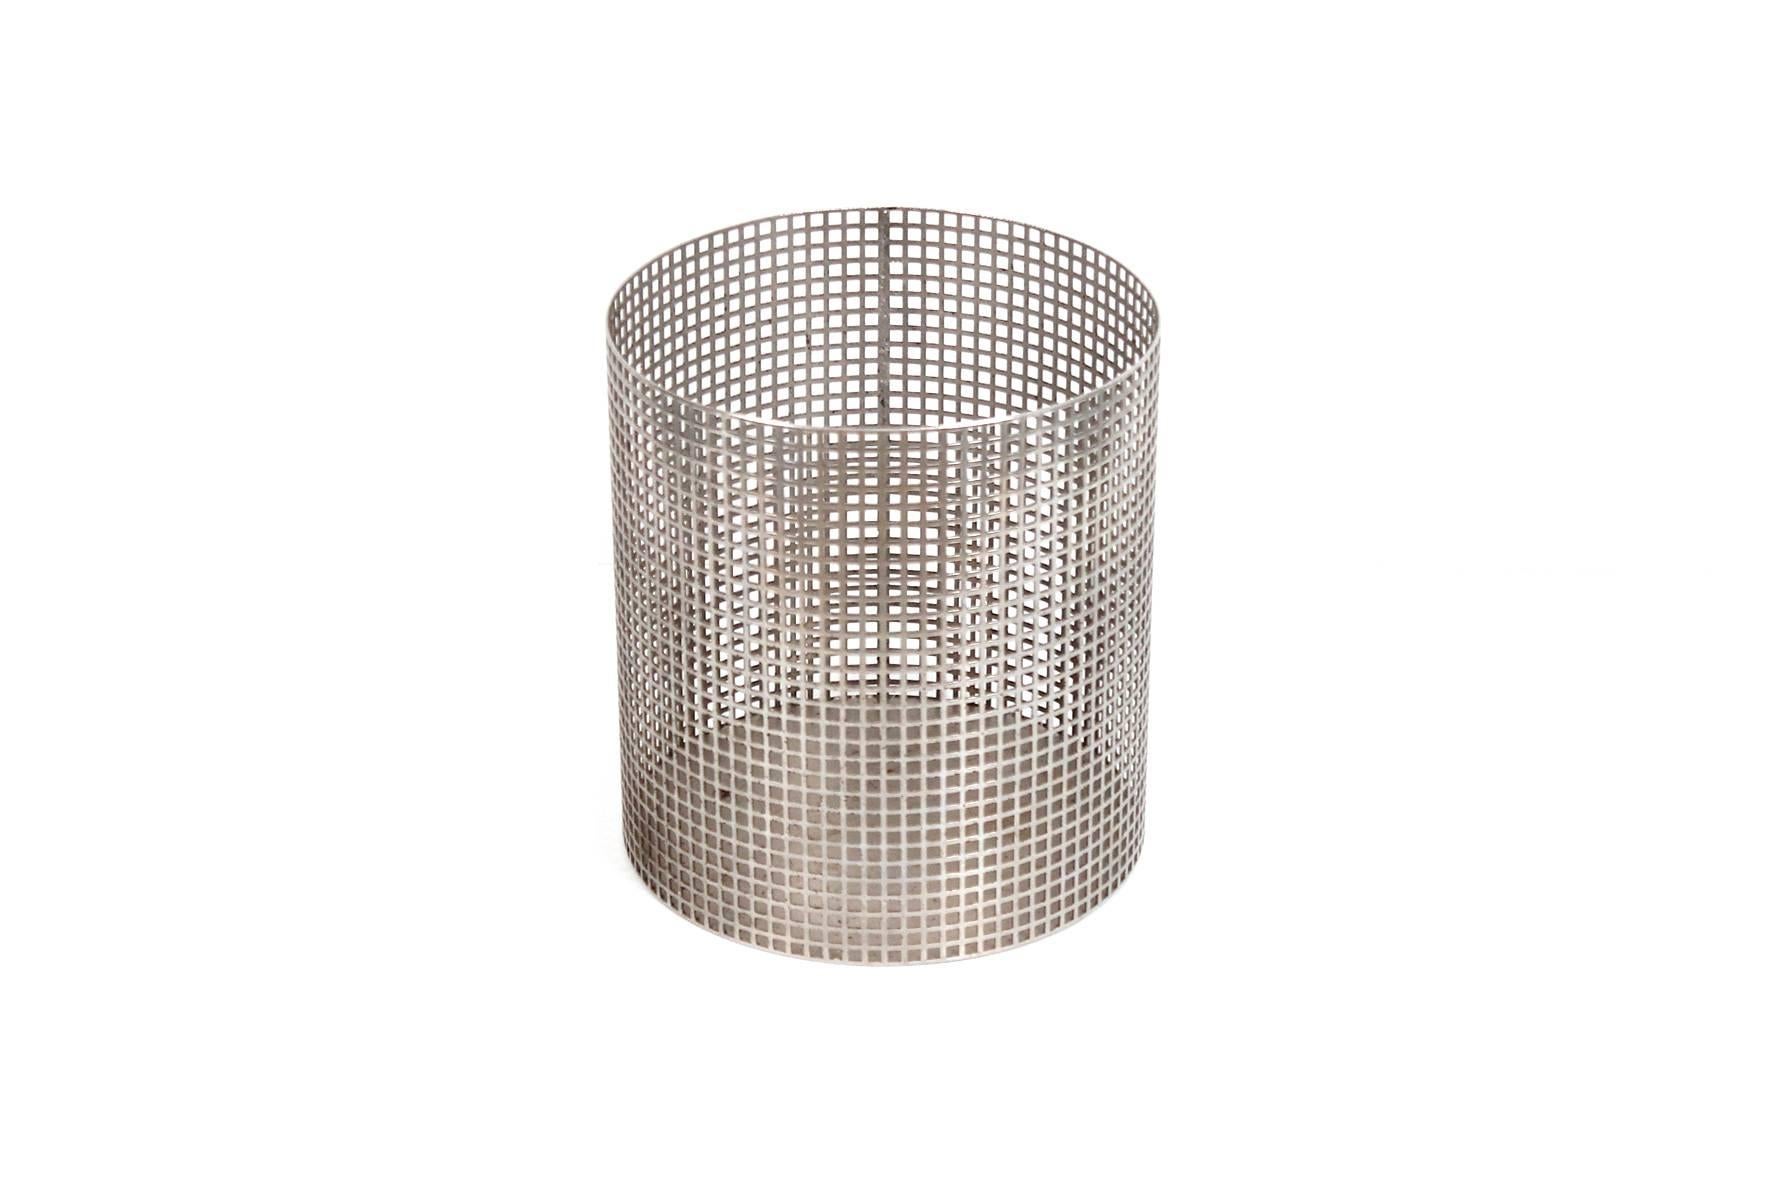 Custom-made wastebasket in polished steel after a known Josef Hoffmann design for the Wiener Werkstatte. Made in Austria in the 1970s.